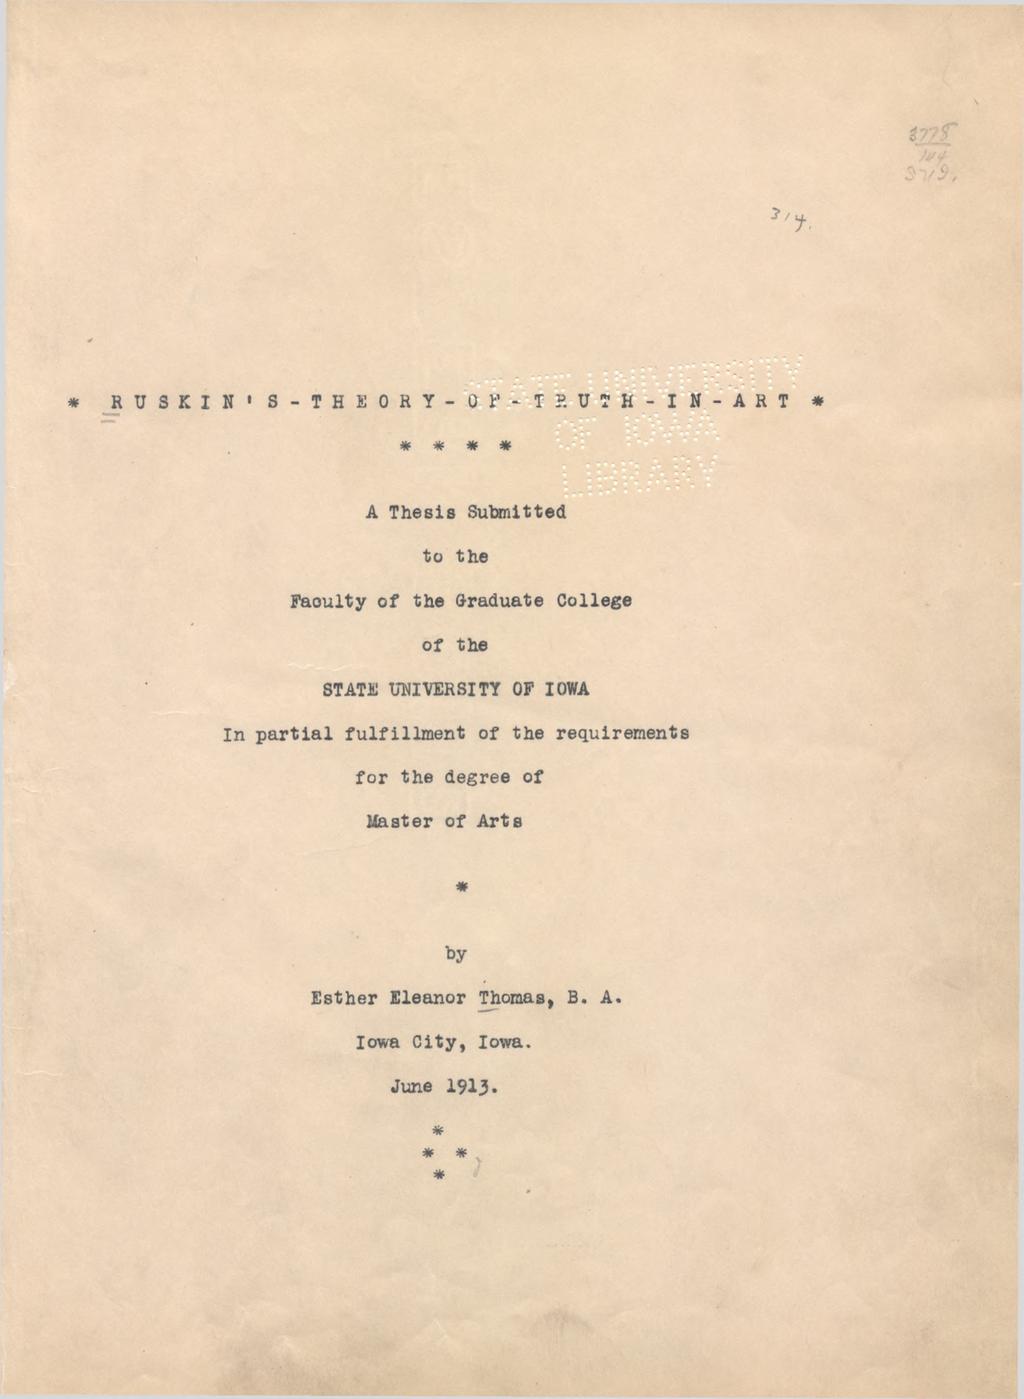 RUSKIN'S THEORY OF TRUTH IN ART A Thesis Submitted to the Faculty of the Graduate College of the STATE UNIVERSITY OF IOWA In